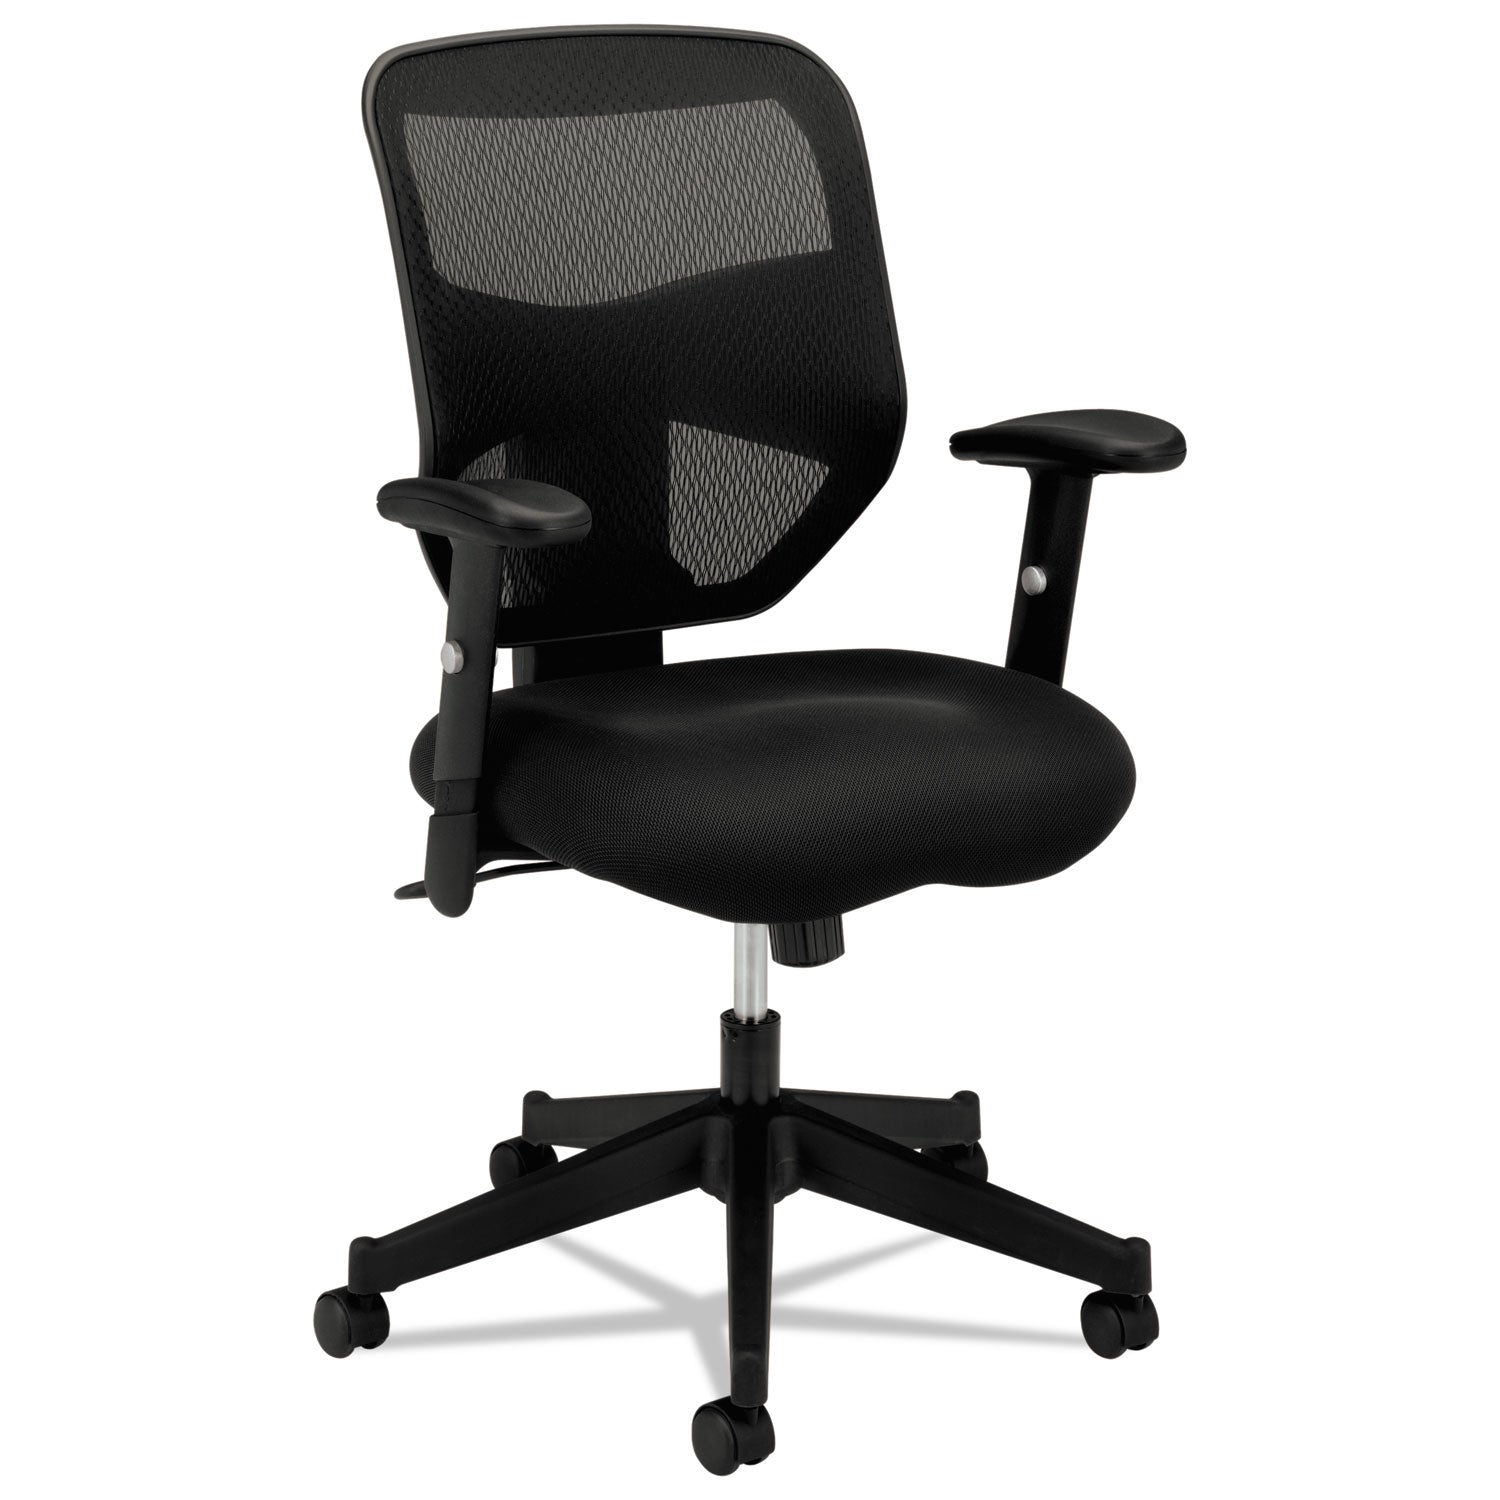 VL531 Mesh High-Back Task Chair with Adjustable Arms, Supports Up to 250 lb, 18" to 22" Seat Height, Black - 